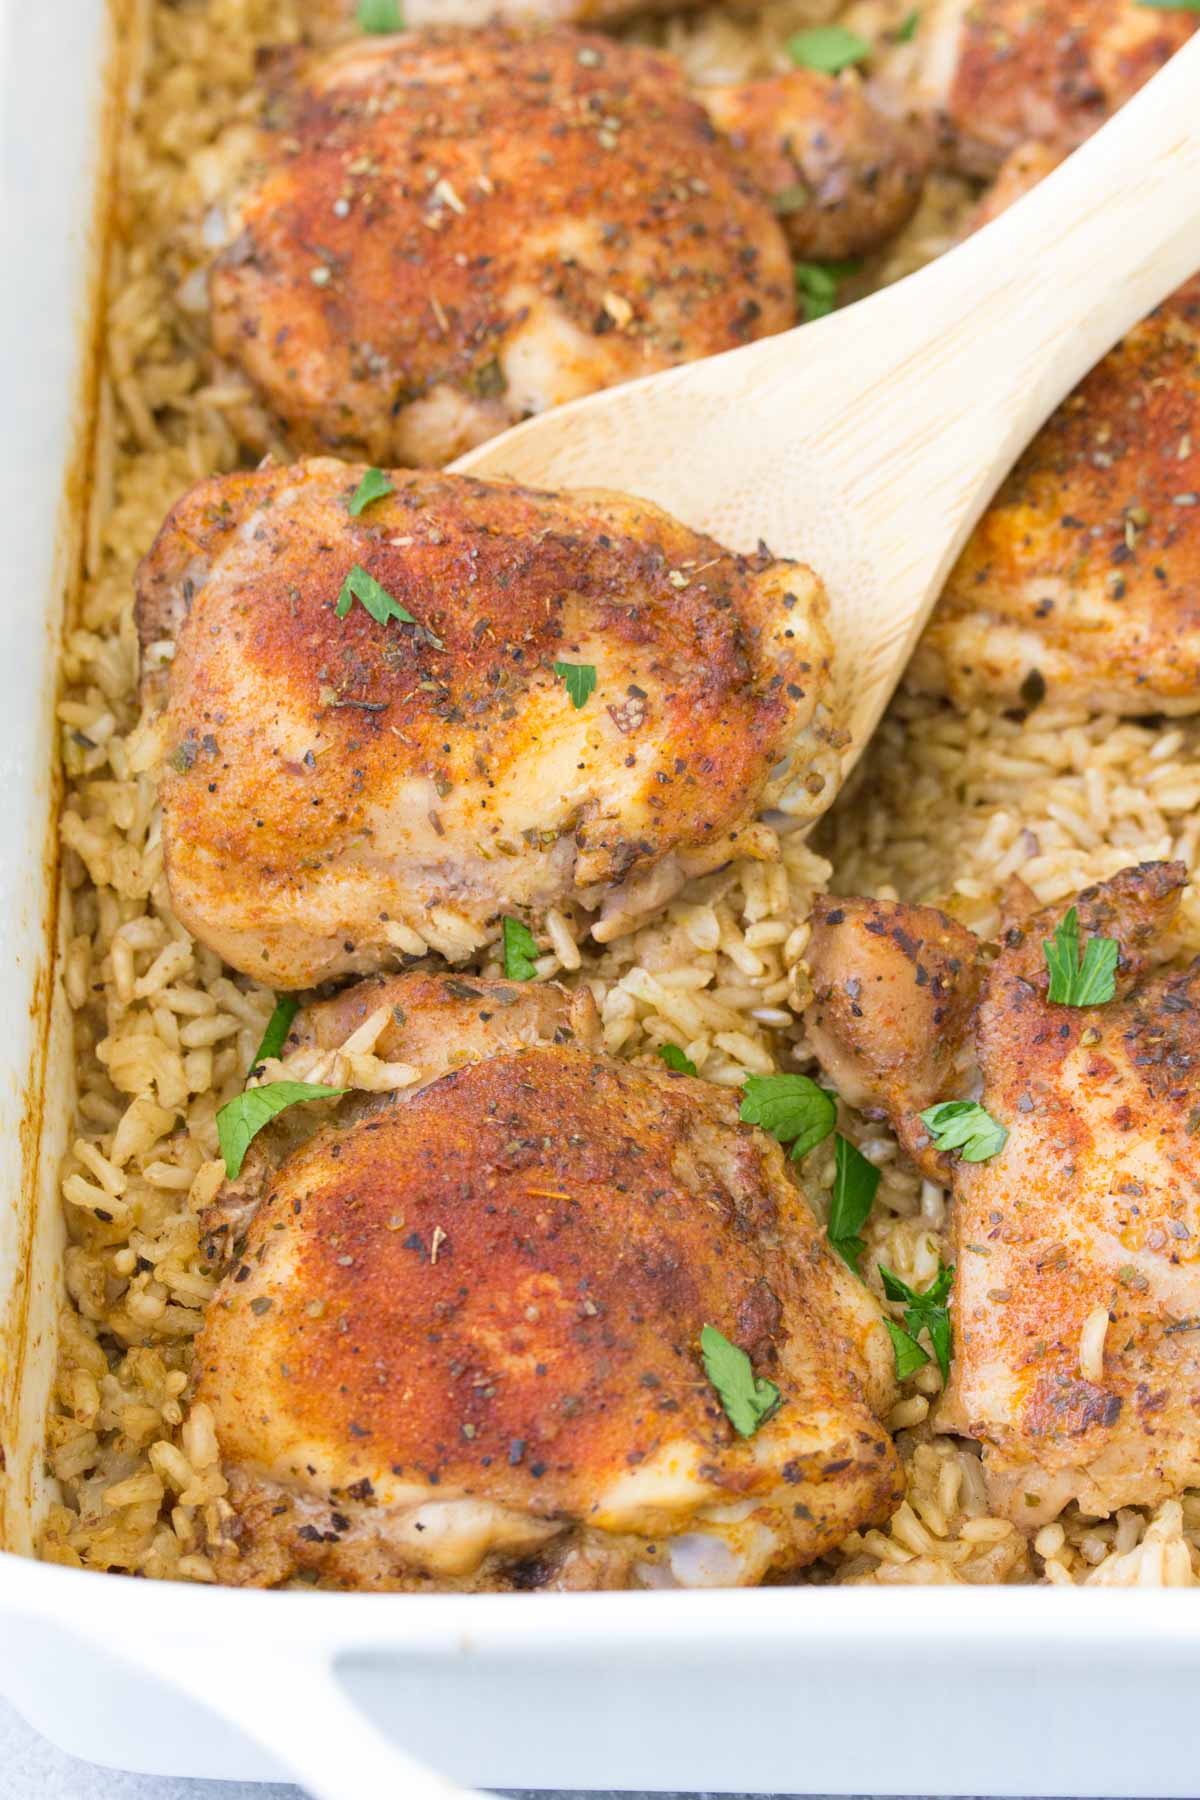 Baked chicken thighs and rice in baking dish with wooden spoon.